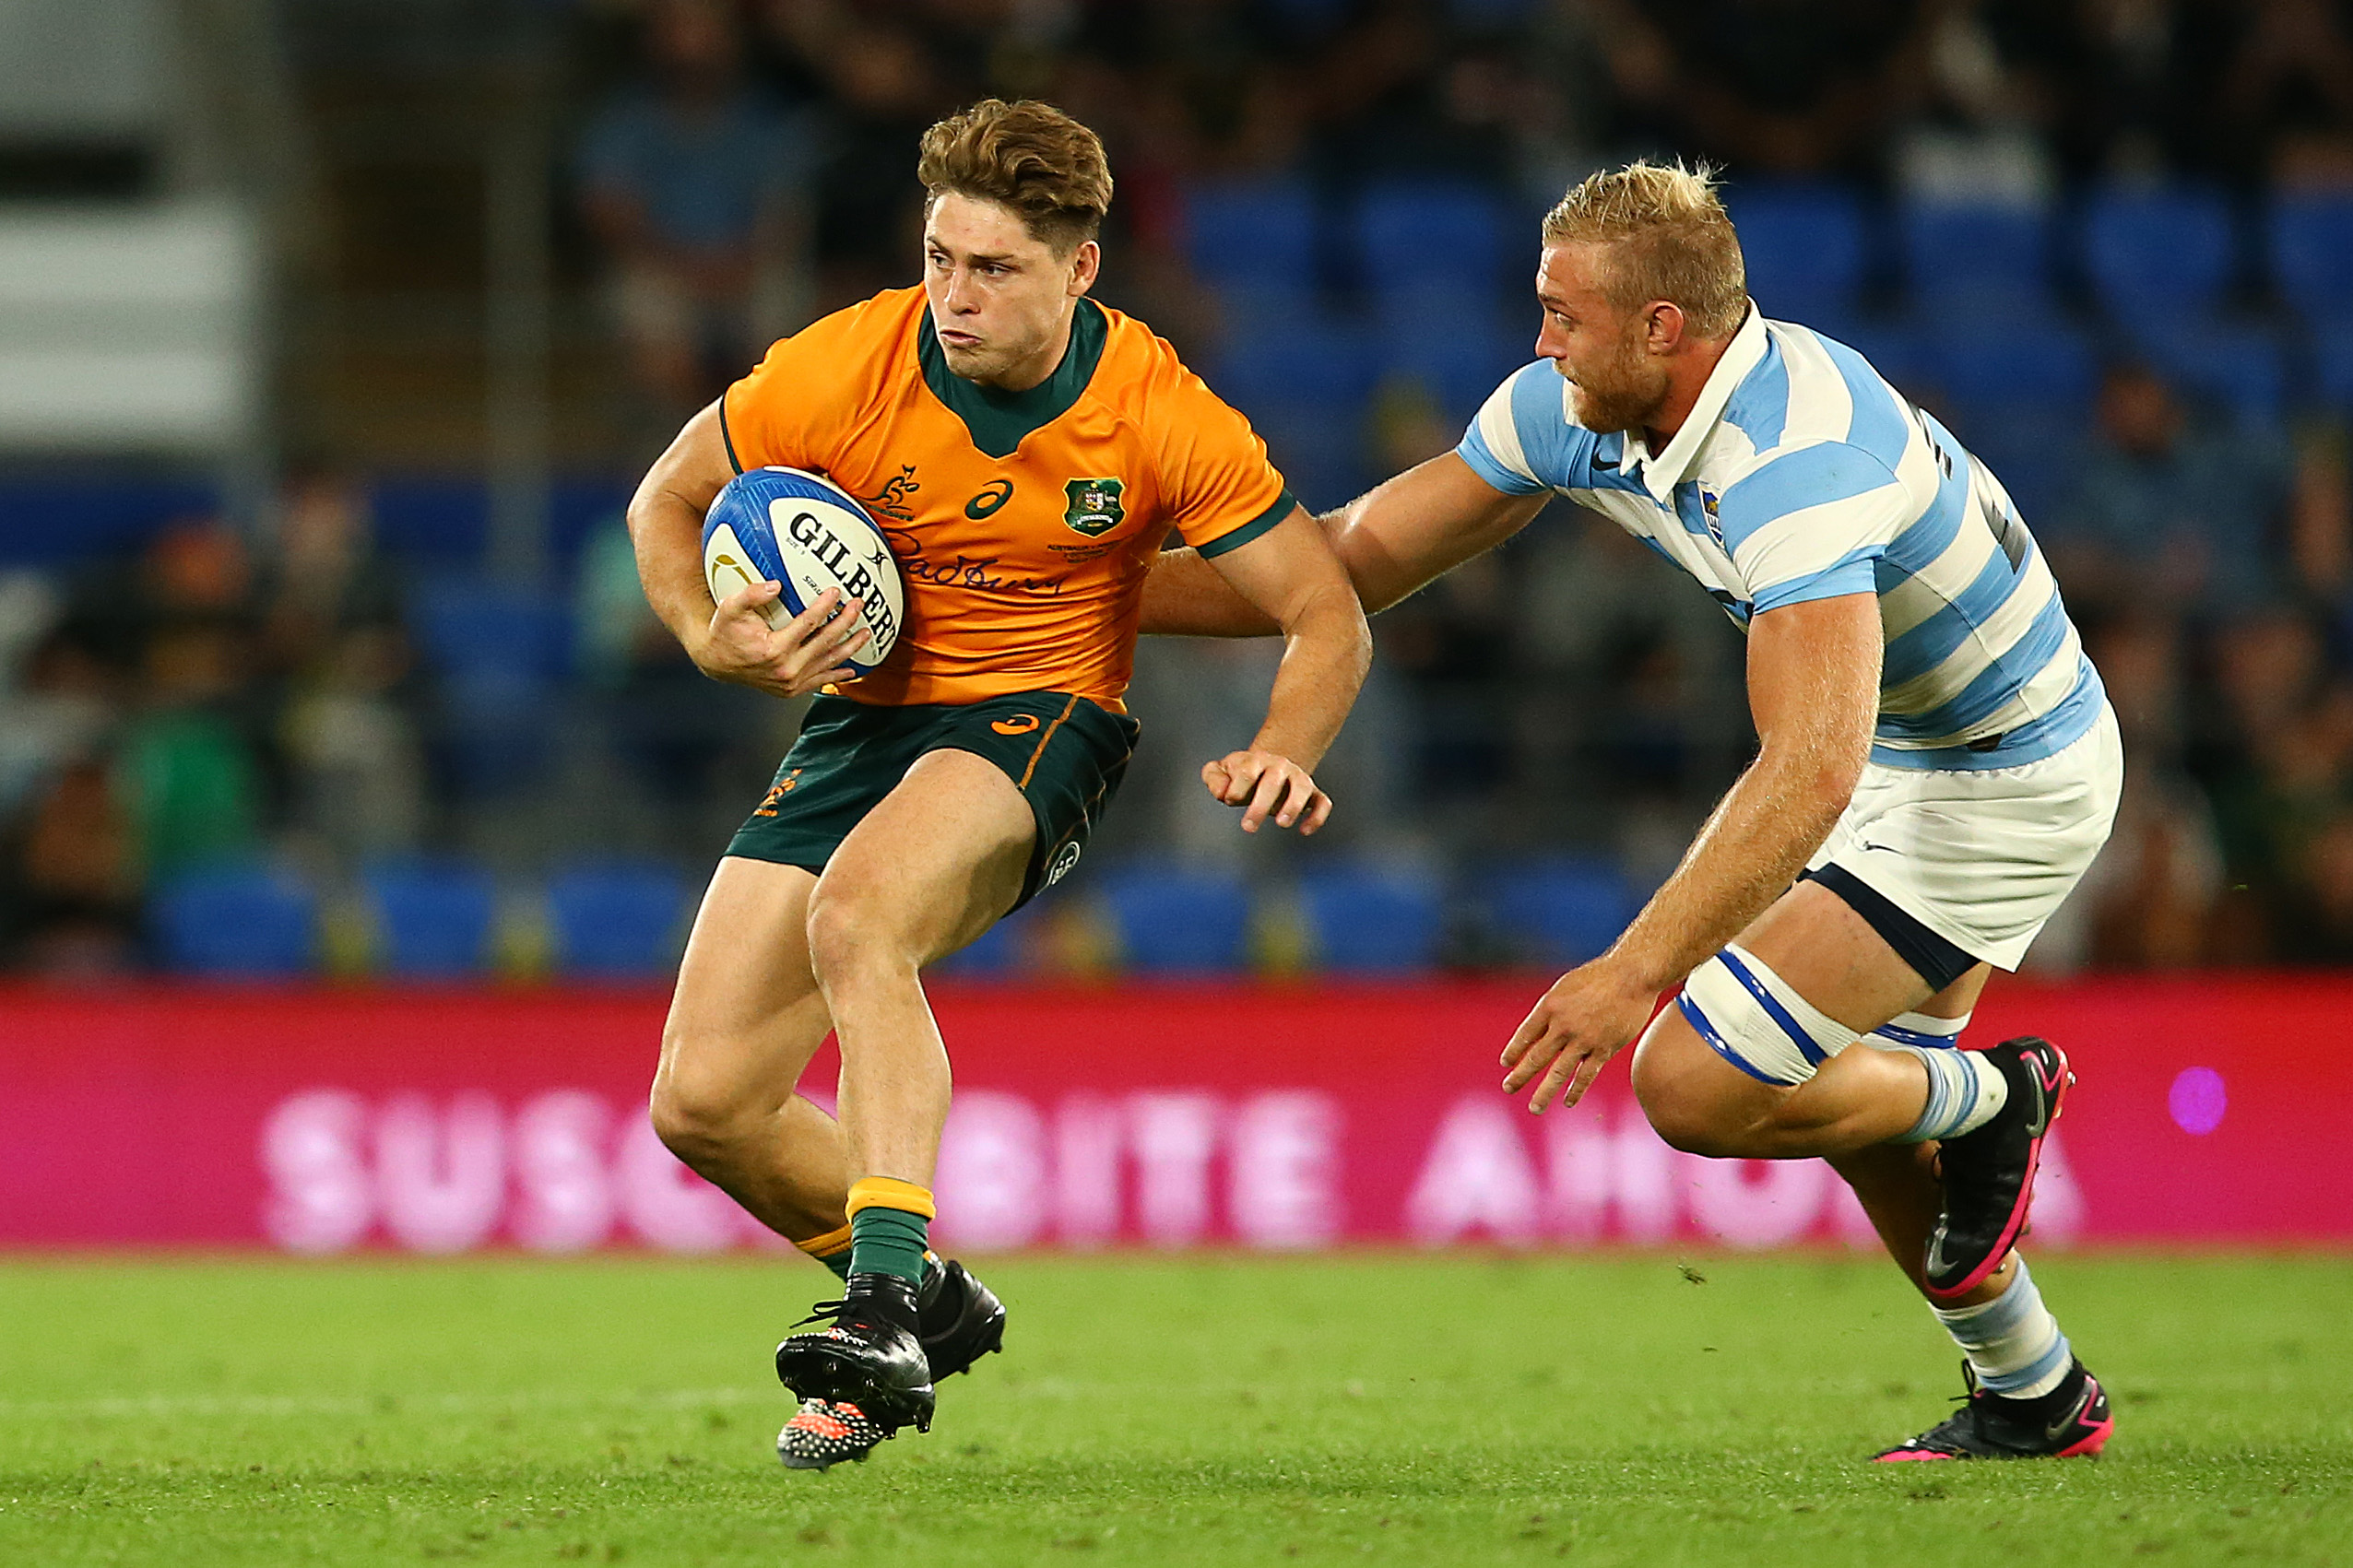 James O'Connor of the Wallabies makes a run against the Pumas.